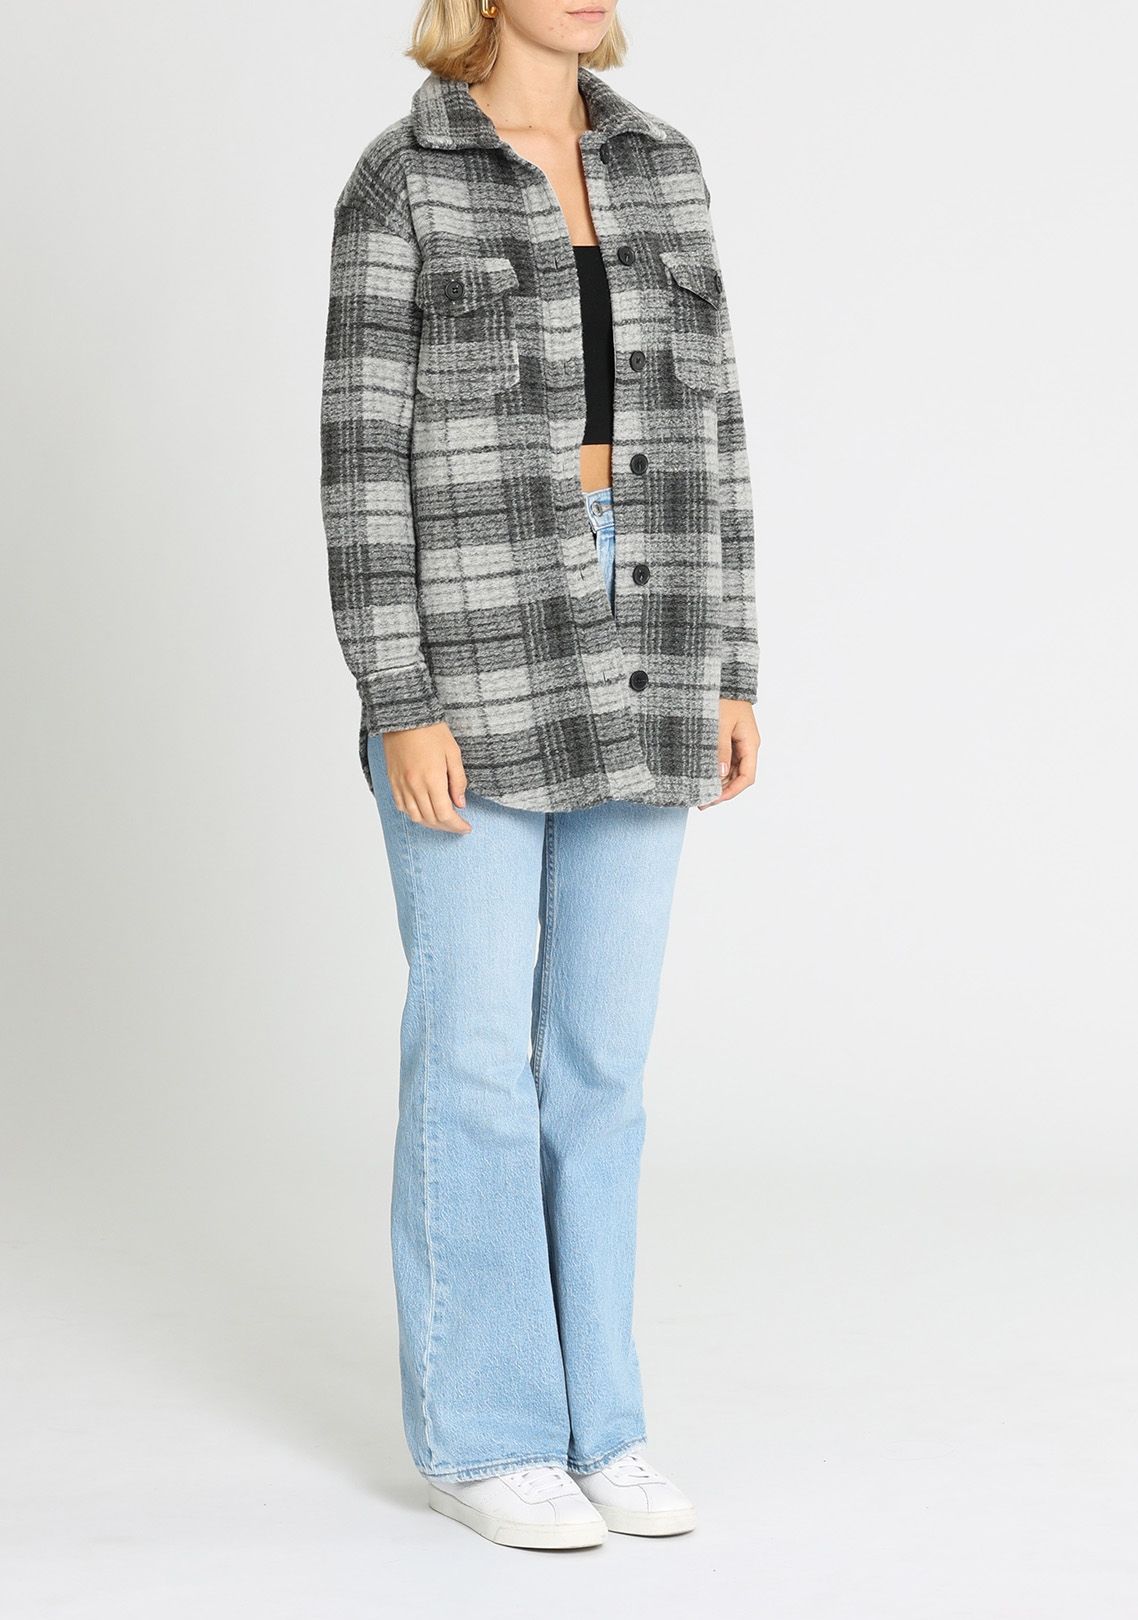 Joie Grey Check Shacket Collared